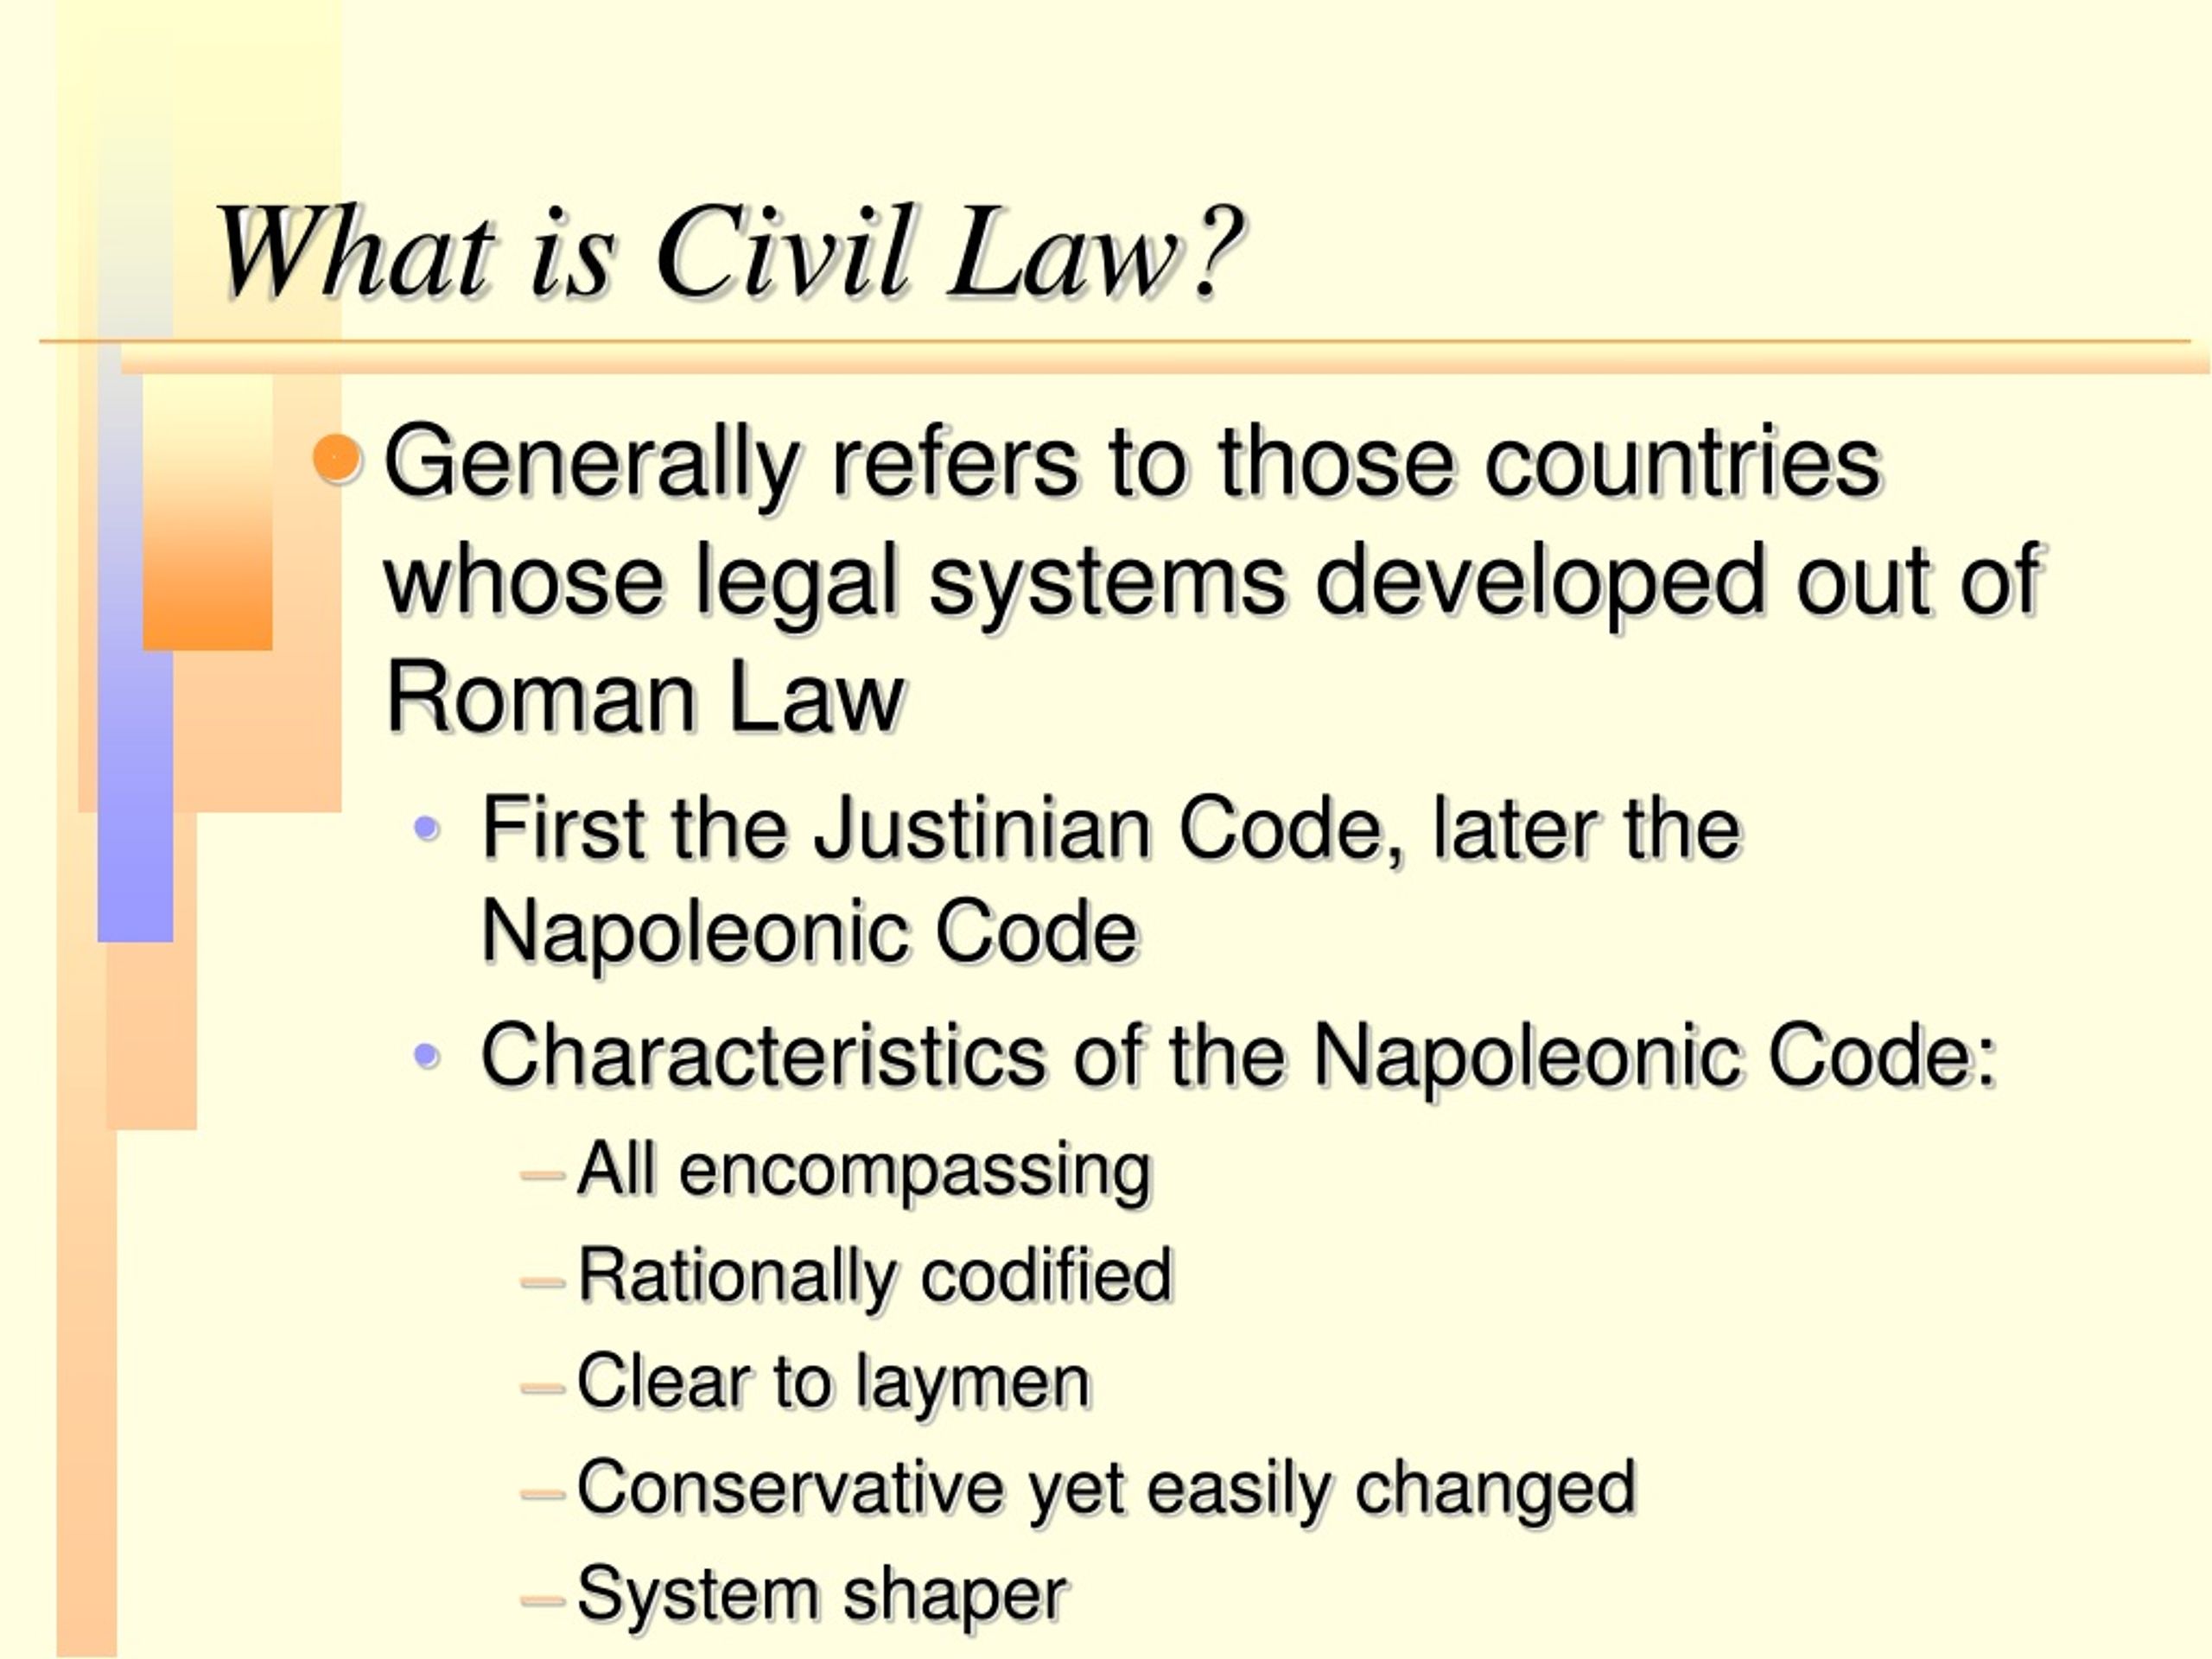 Legal law systems